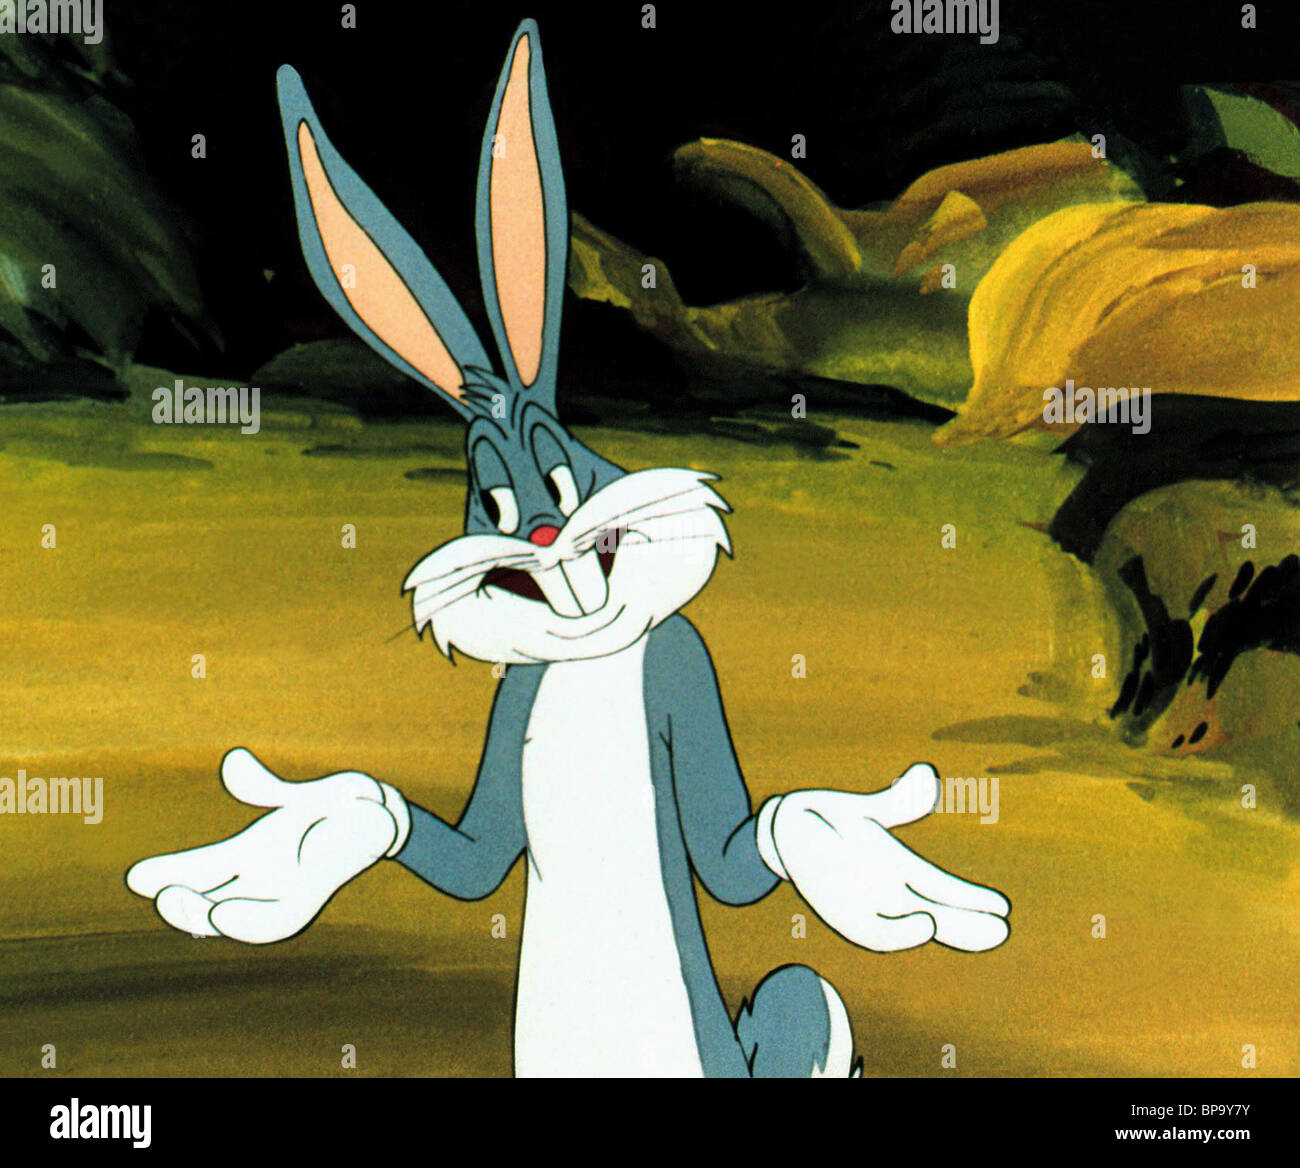 Incredible Compilation of Bugs Bunny Images - Over 999 Stunning Bugs ...